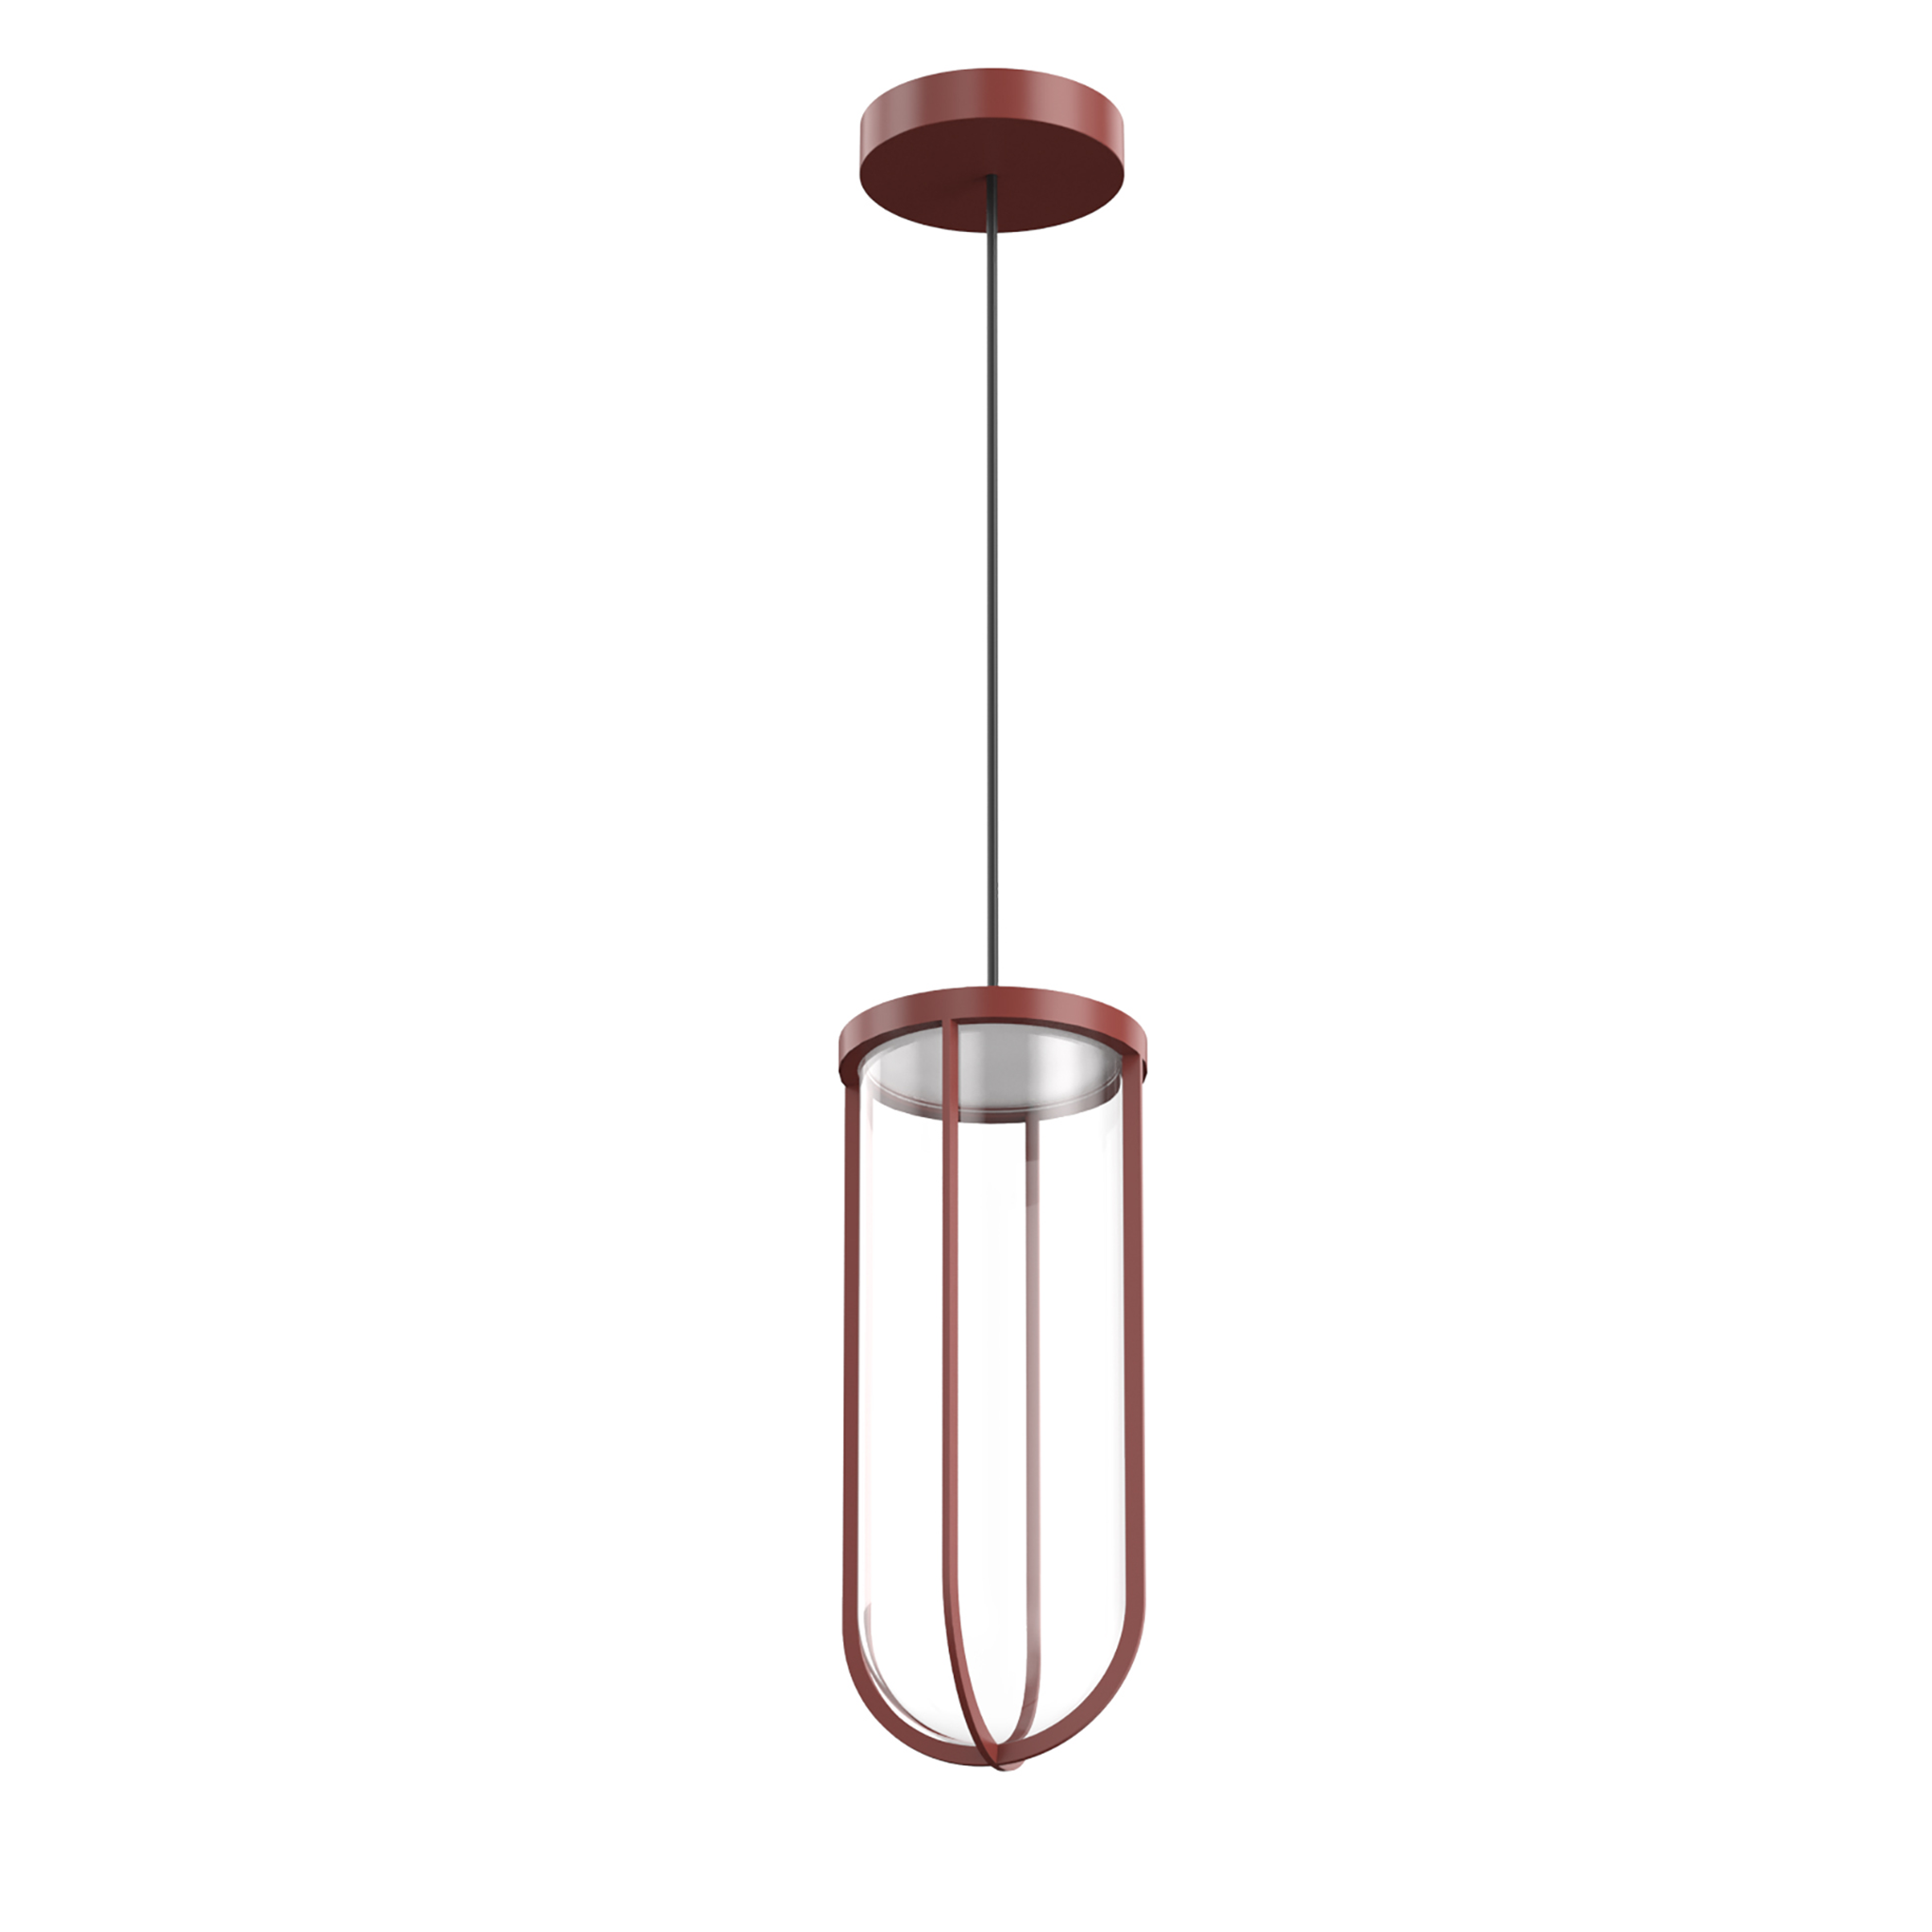 In Vitro Suspension Lamp by Philippe Starck for Flos